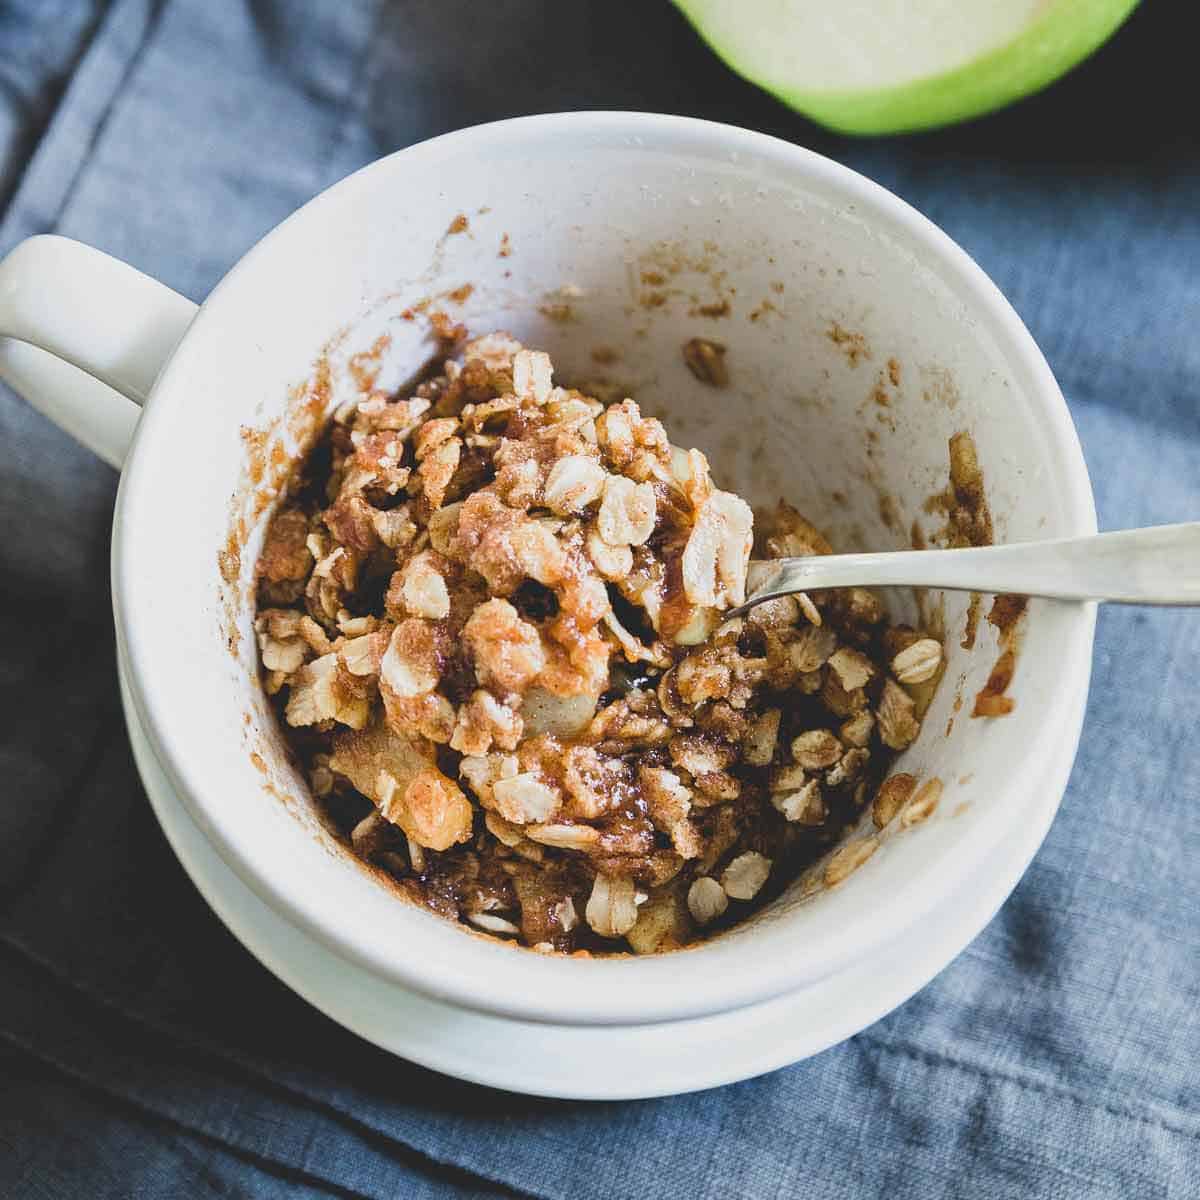 This recipe shows you how to make apple crisp in the microwave for a single serving dessert.